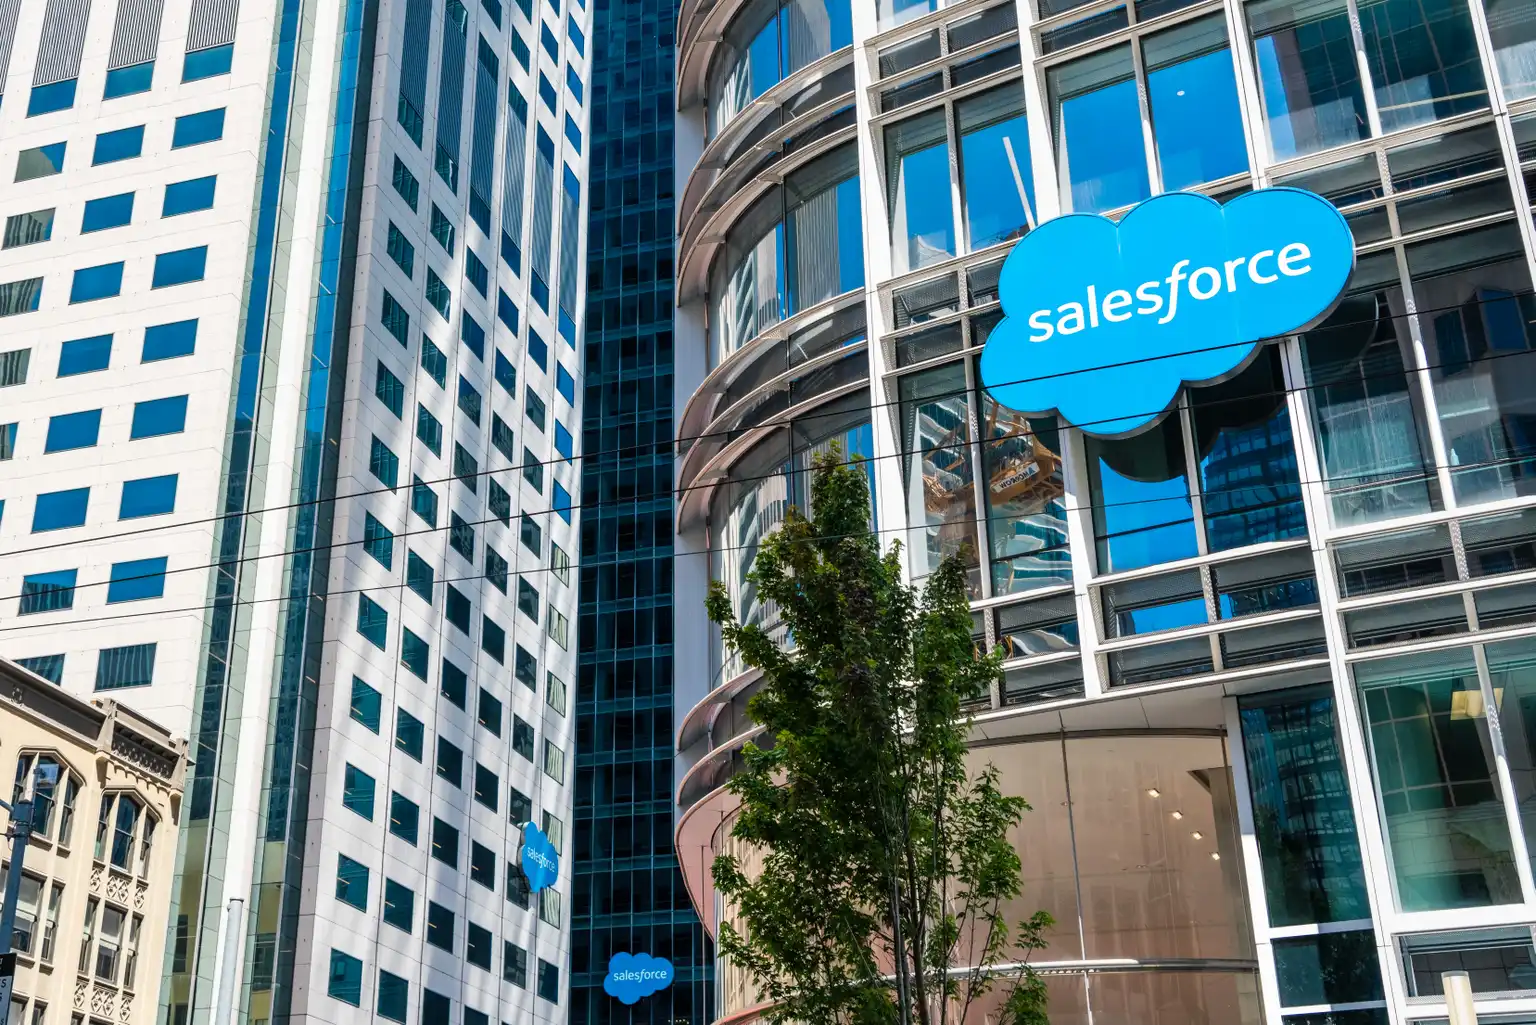 Salesforce & Informatica: No Matter How It Ends, These Are The Takeaways - Seeking Alpha